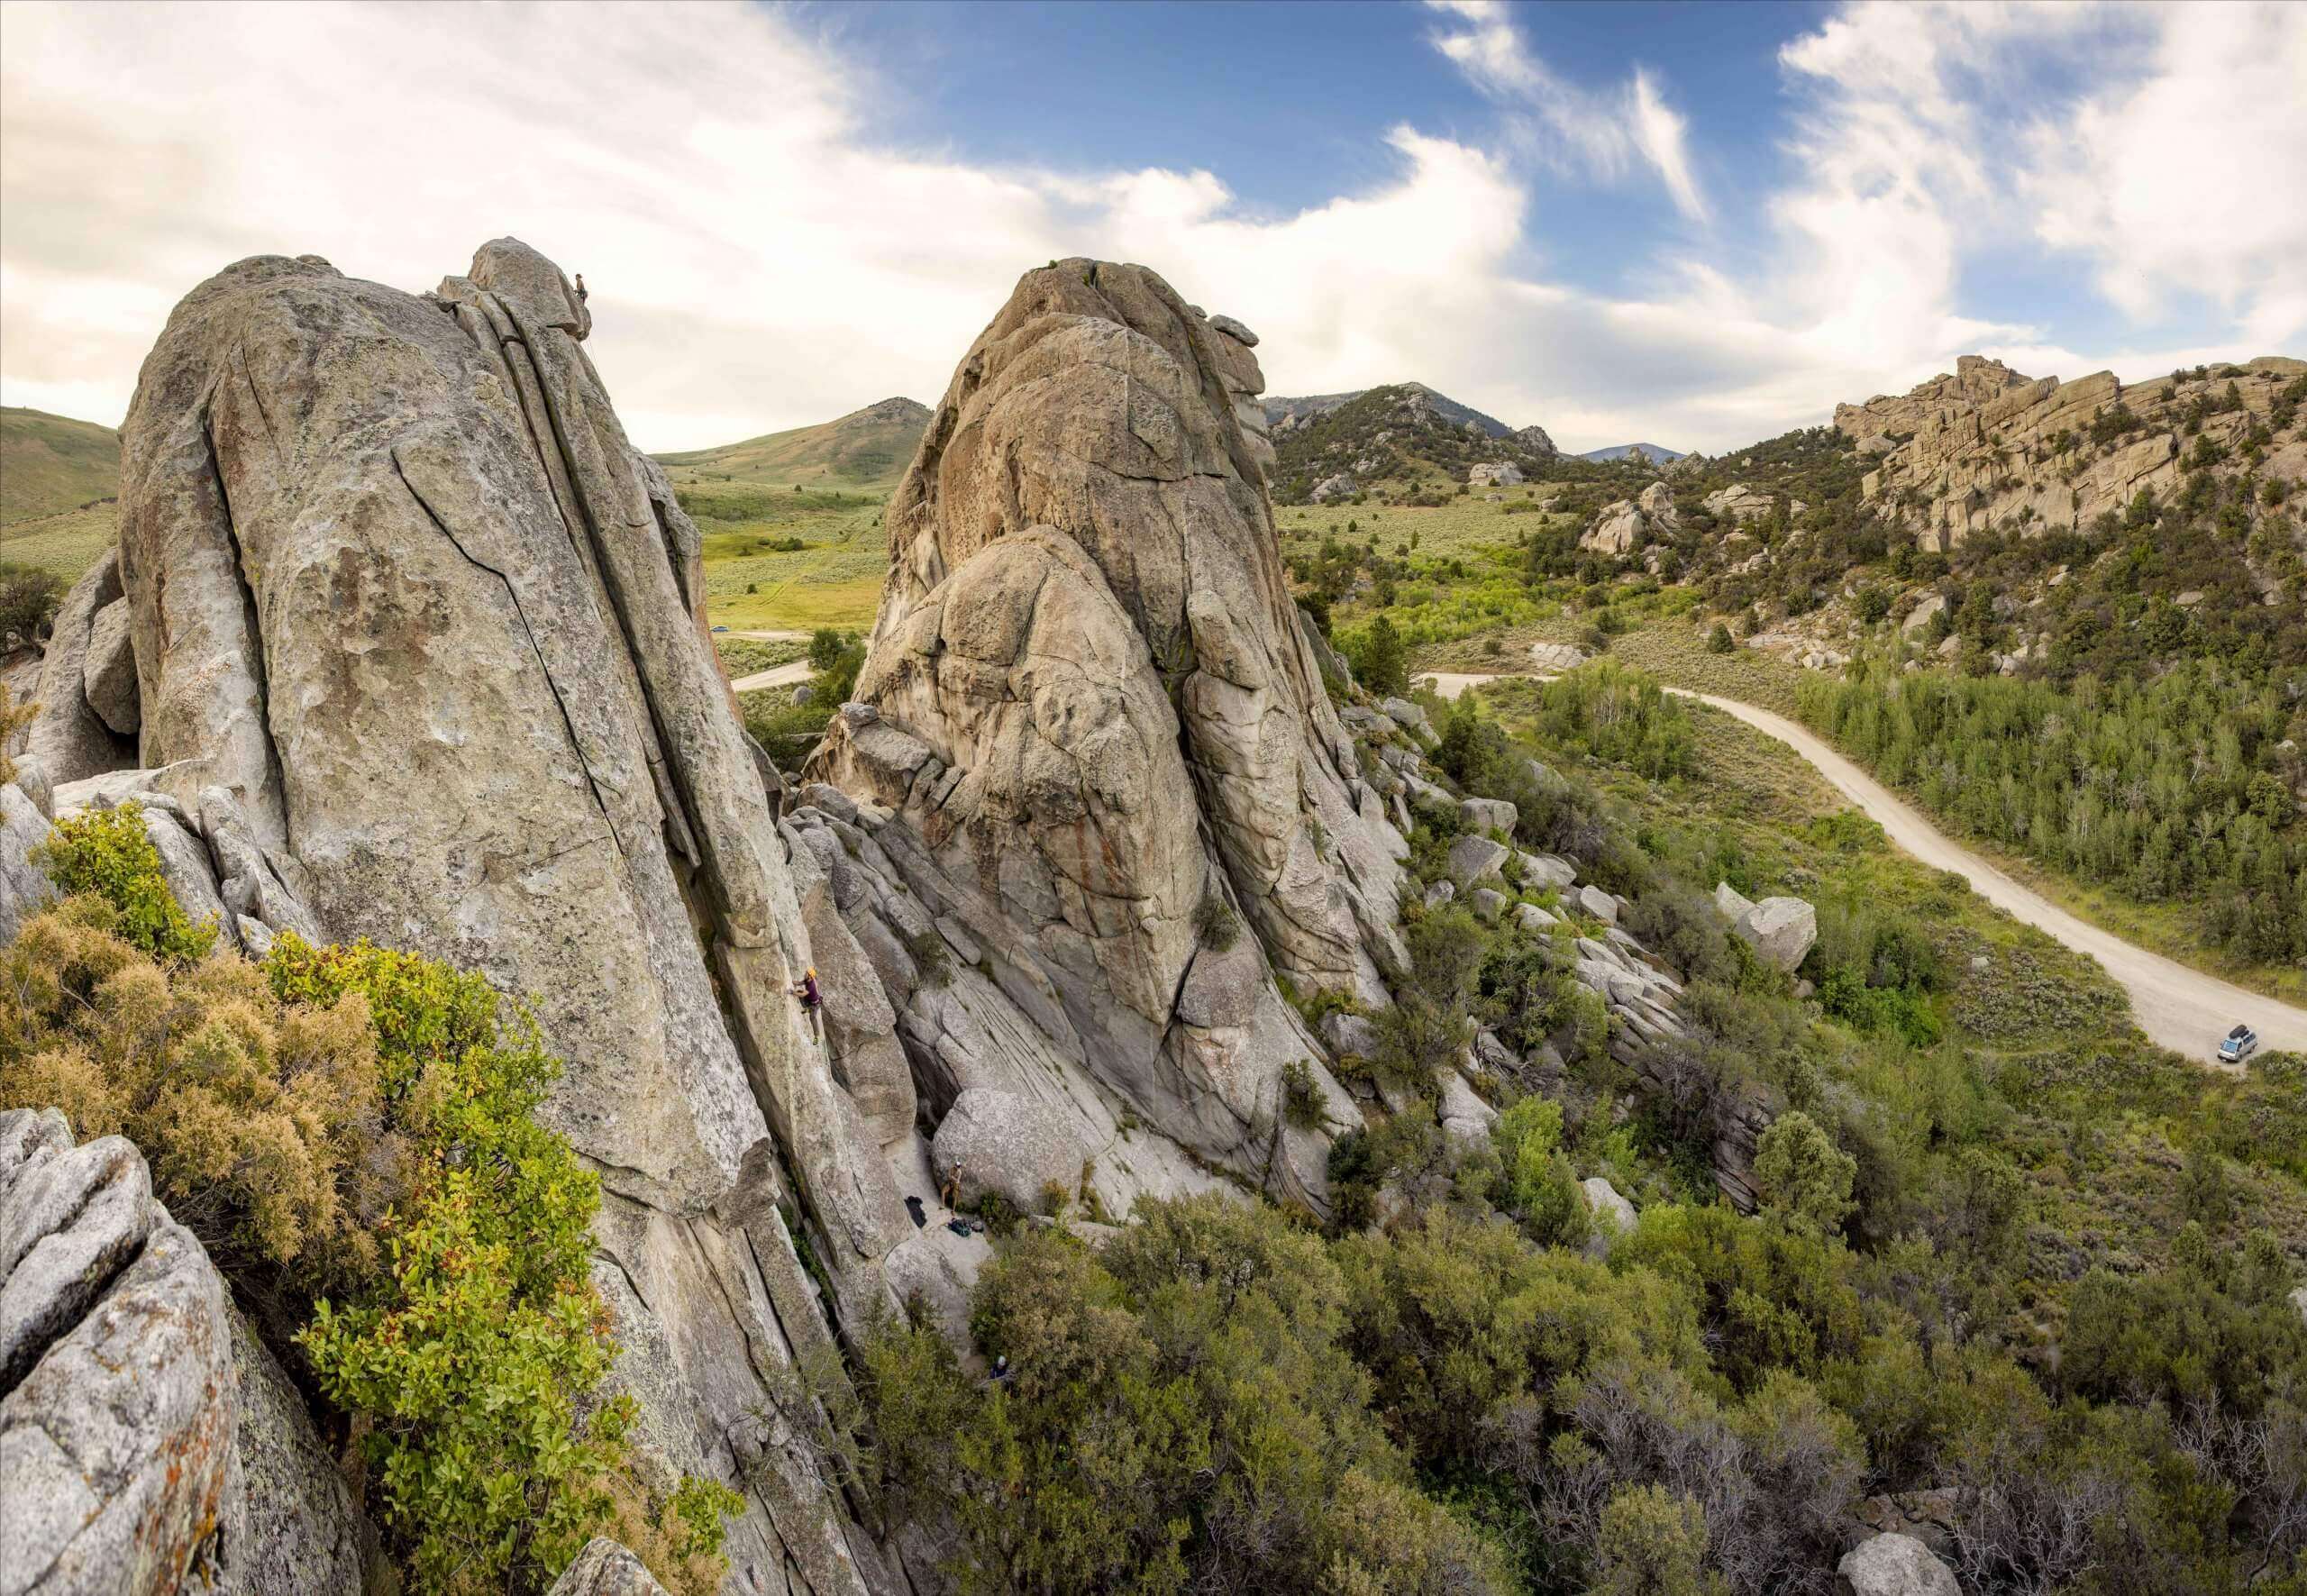 View of giant rocks surrounded by shrubs at City of Rocks National Reserve.